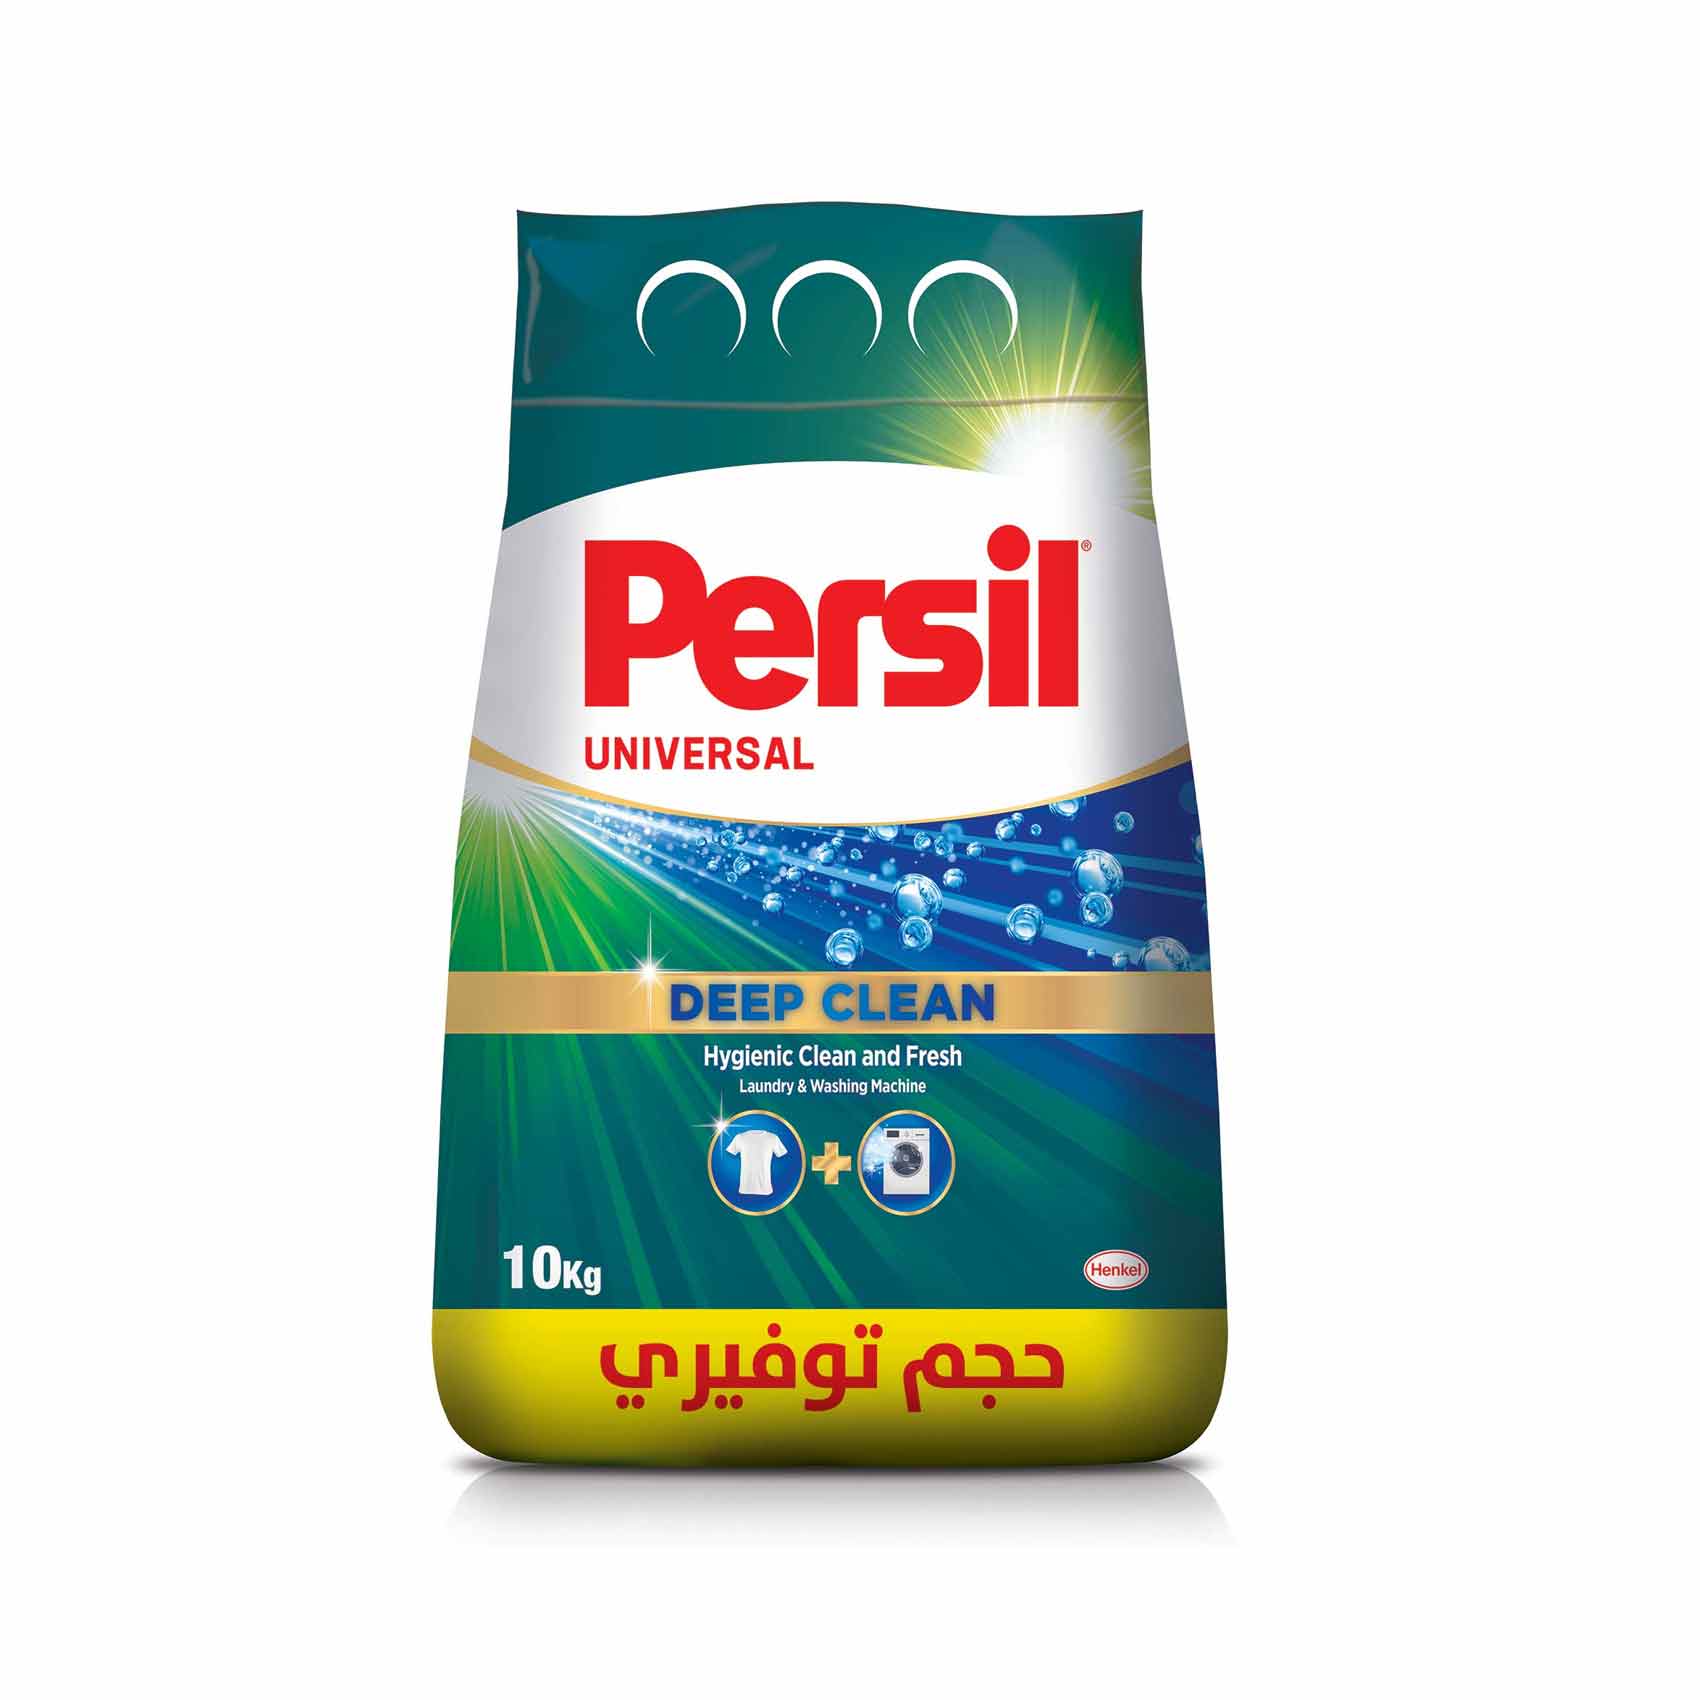 Persil Universal Powder Laundry Detergent With Deep Clean Plus 10KG